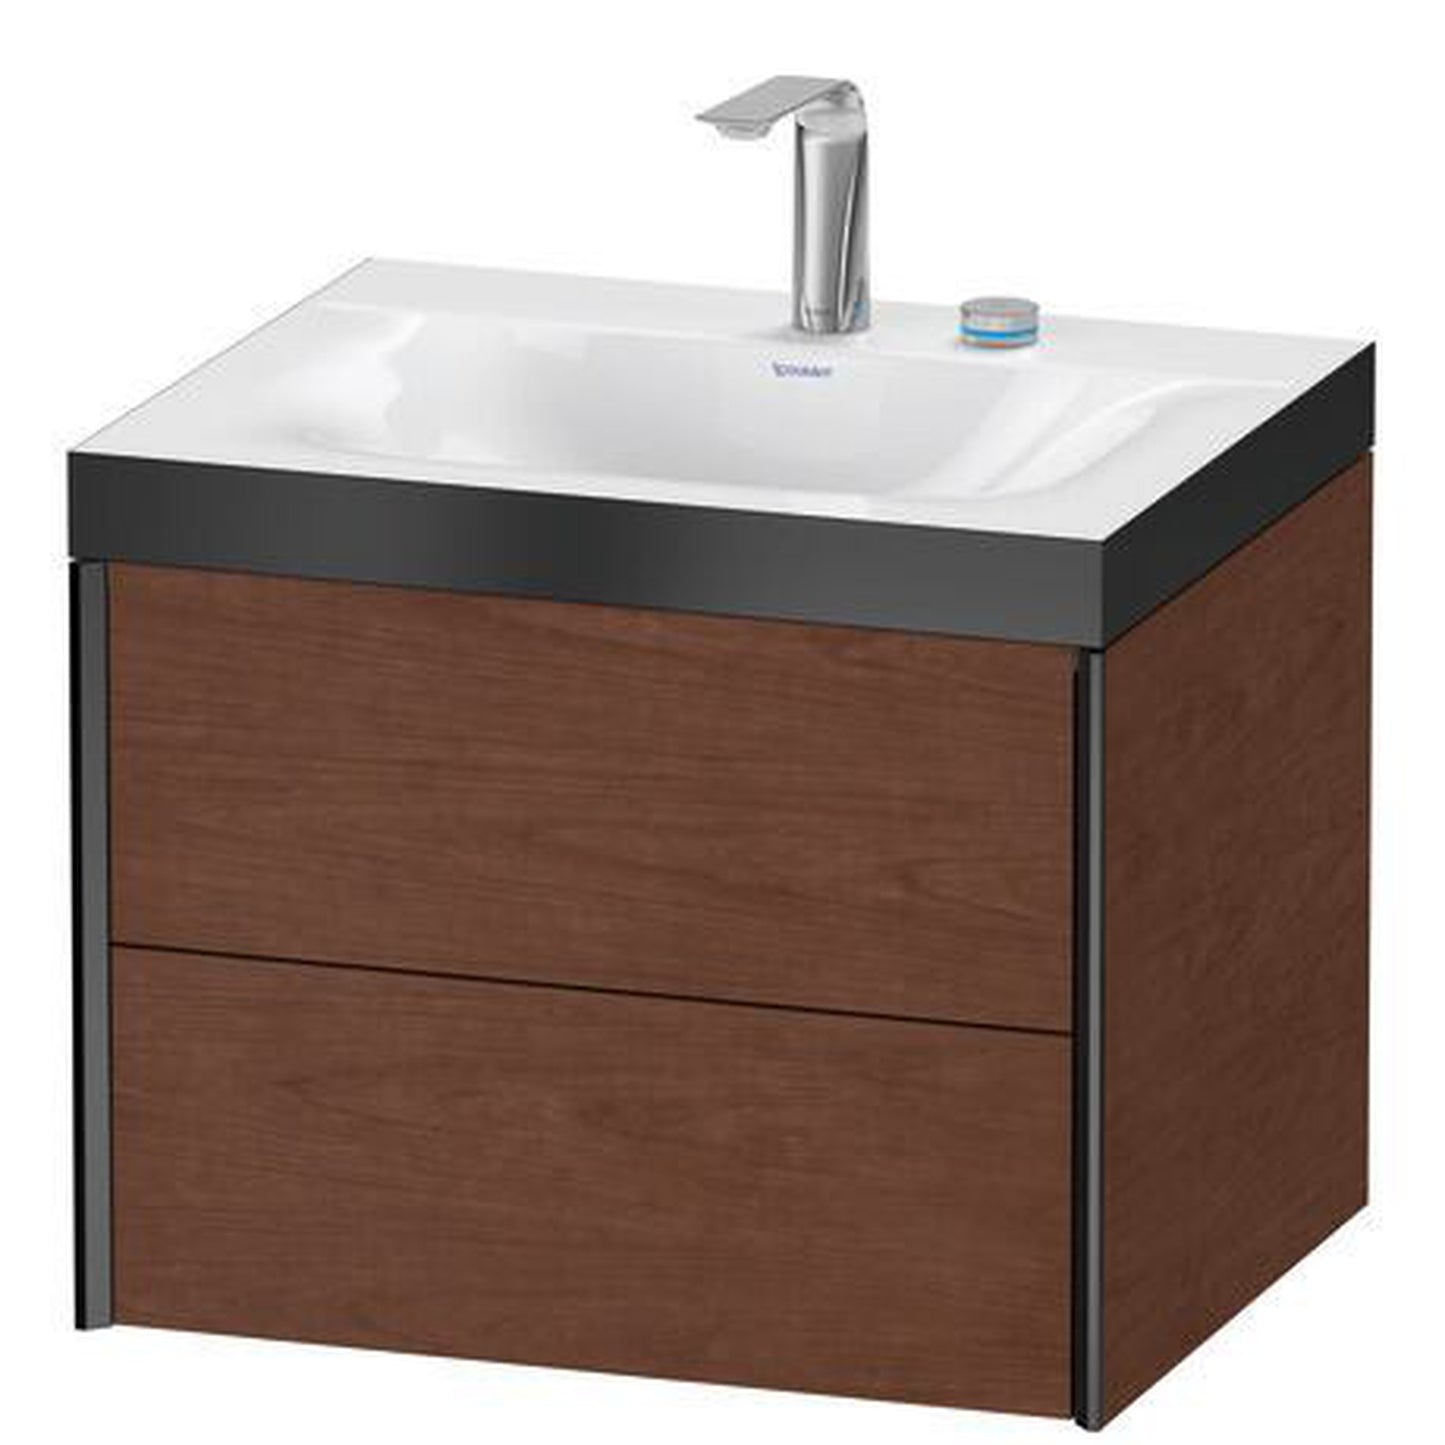 Duravit Xviu 24" x 20" x 19" Two Drawer C-Bonded Wall-Mount Vanity Kit With Two Tap Holes, American Walnut (XV4614EB213P)